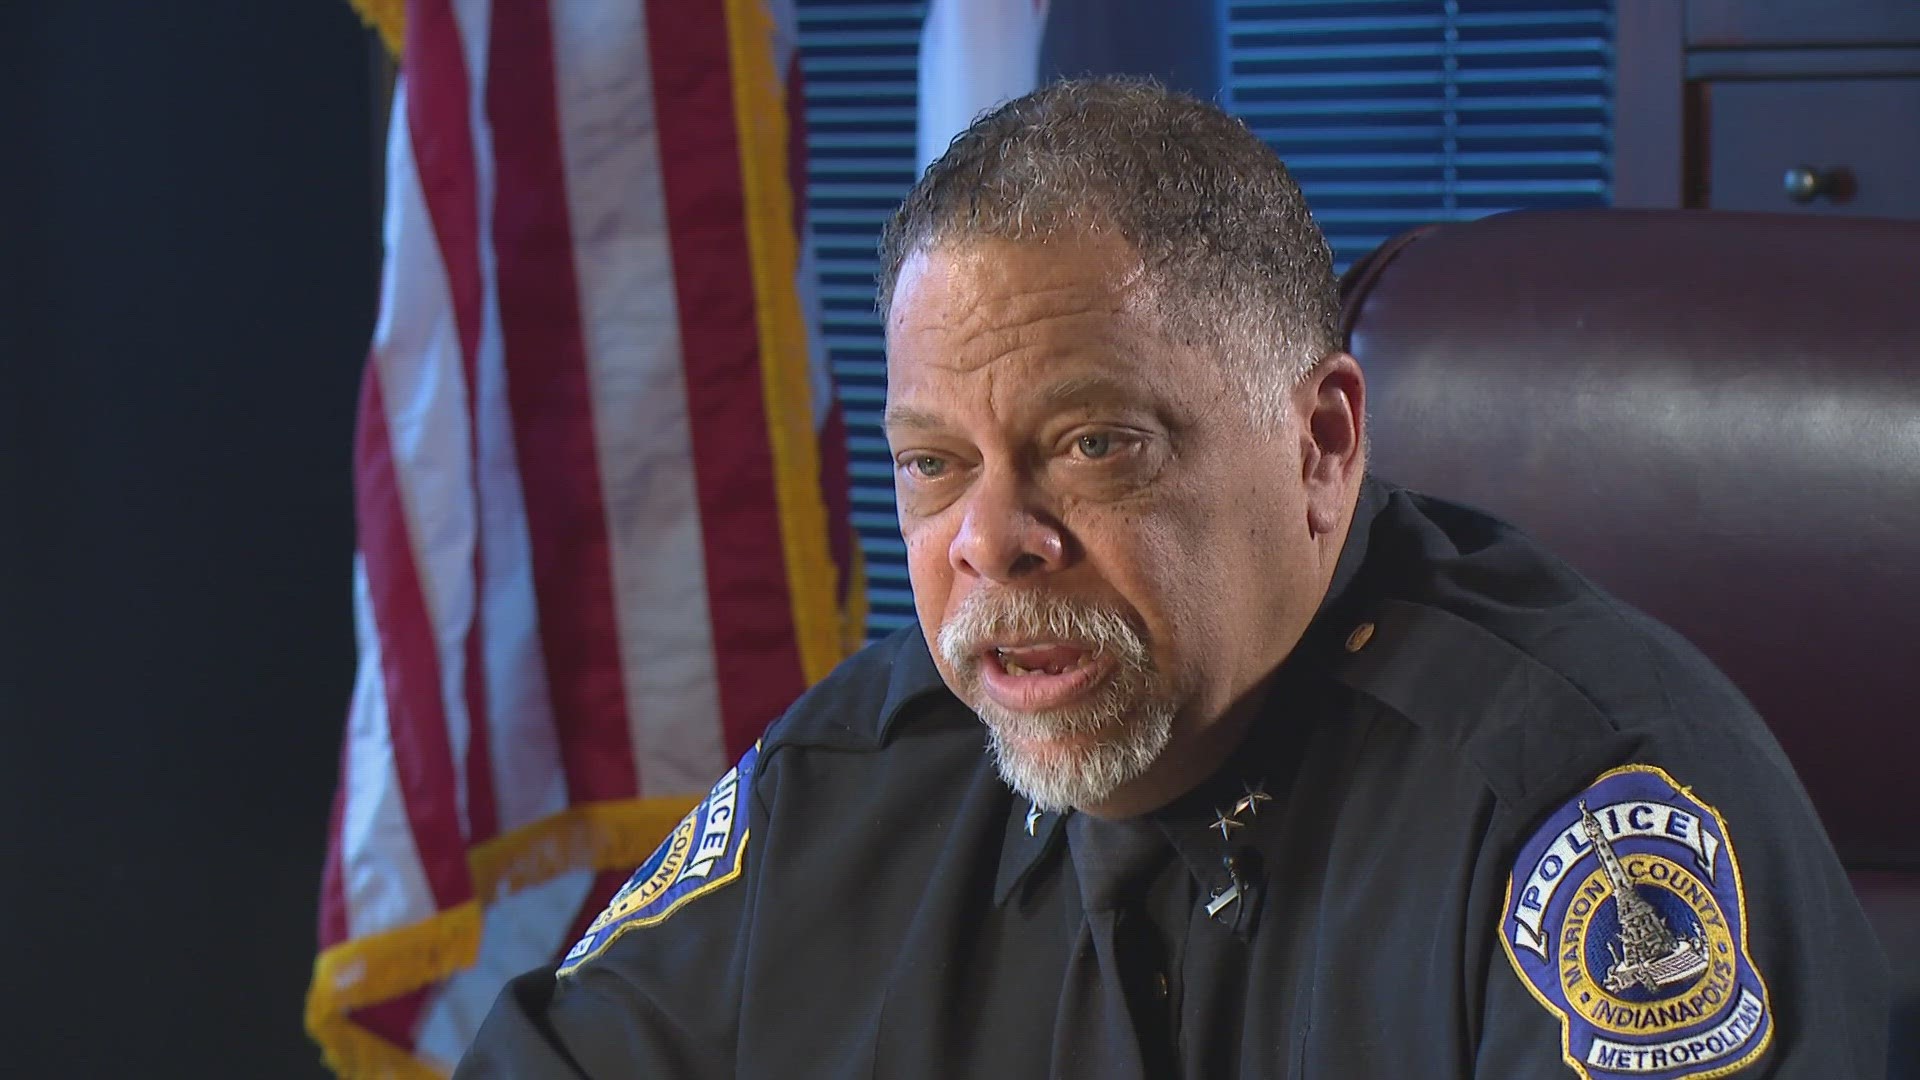 Randal Taylor plans to stay with the department even as he leaves the chief's job.